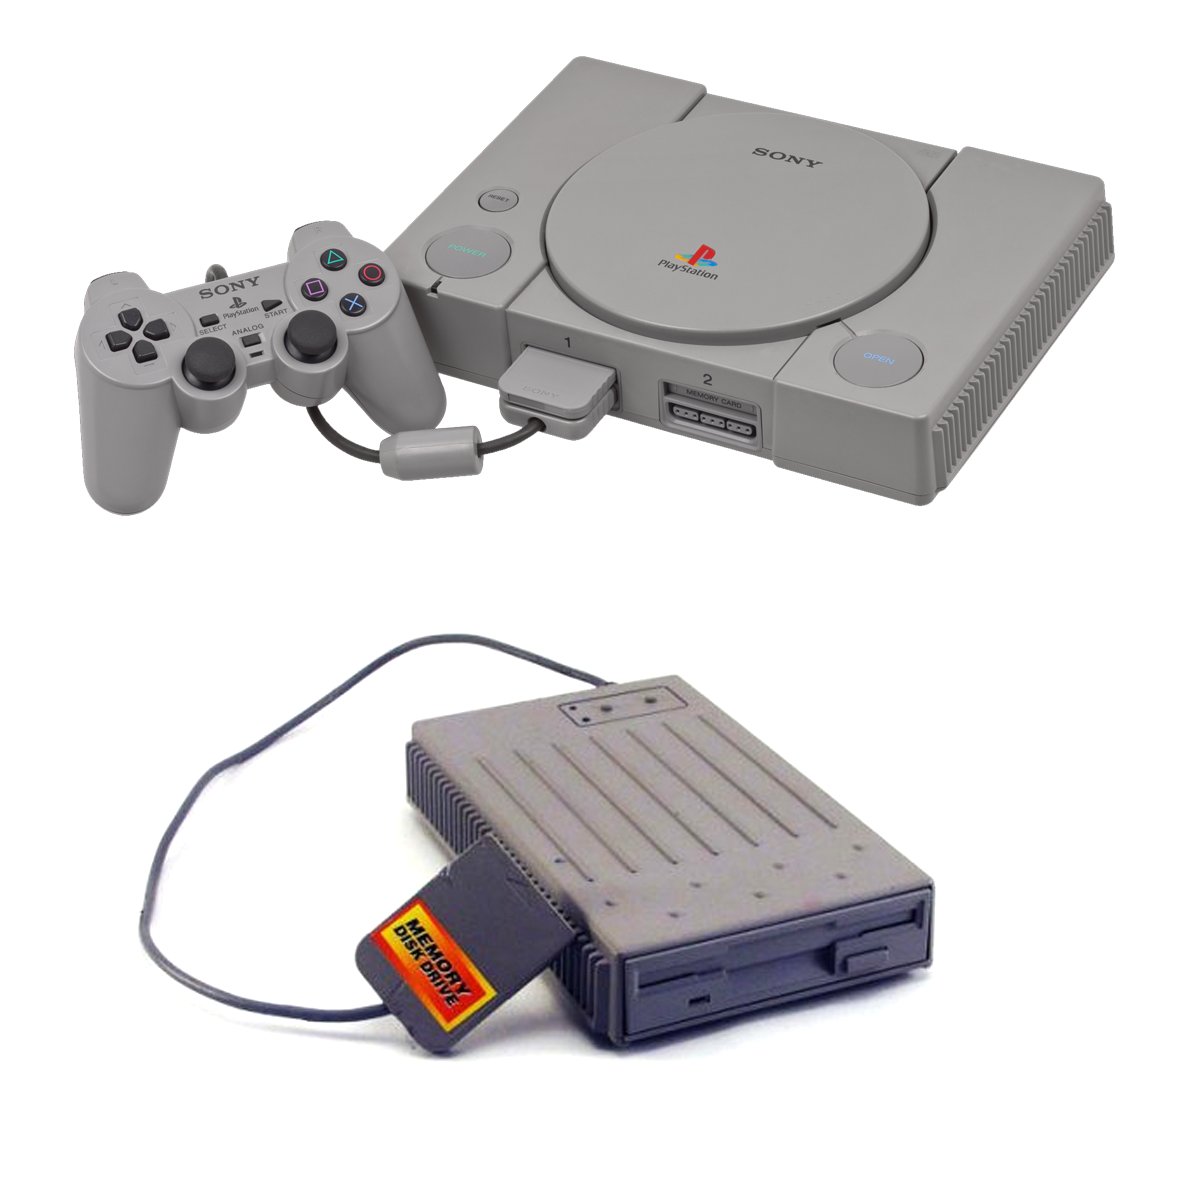 PlayStation's memory cards were pricey and limited. That got third-party wheels turning, and before long, Datel released the Memory Drive, a floppy disk drive which plugged into the PS1 memory card slot and let owners store game saves on cheap and plentiful 3.5-inch floppy disks.